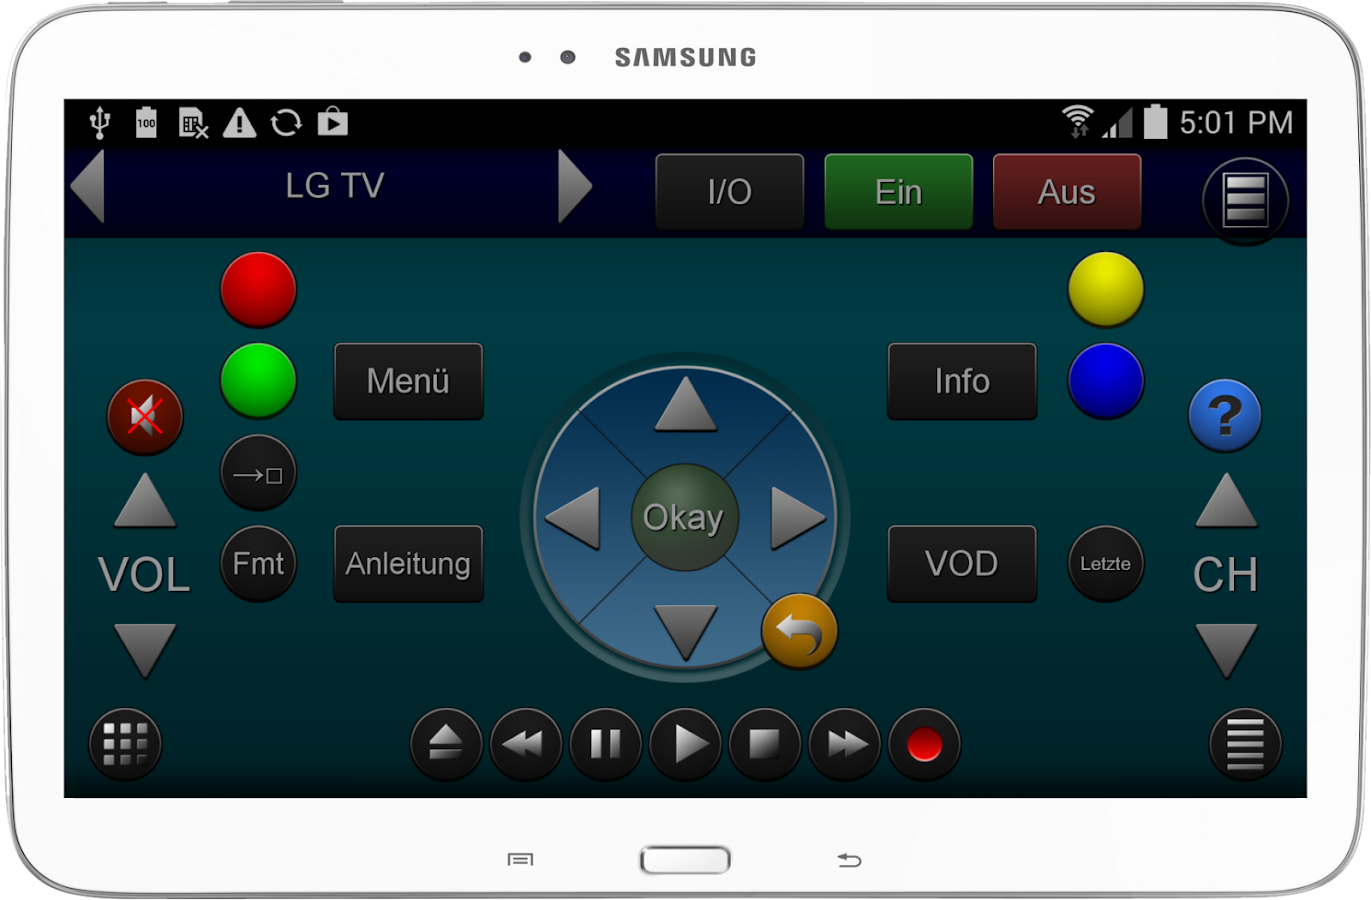 ZappIR Universal IR Remote - Android Apps on Google Play